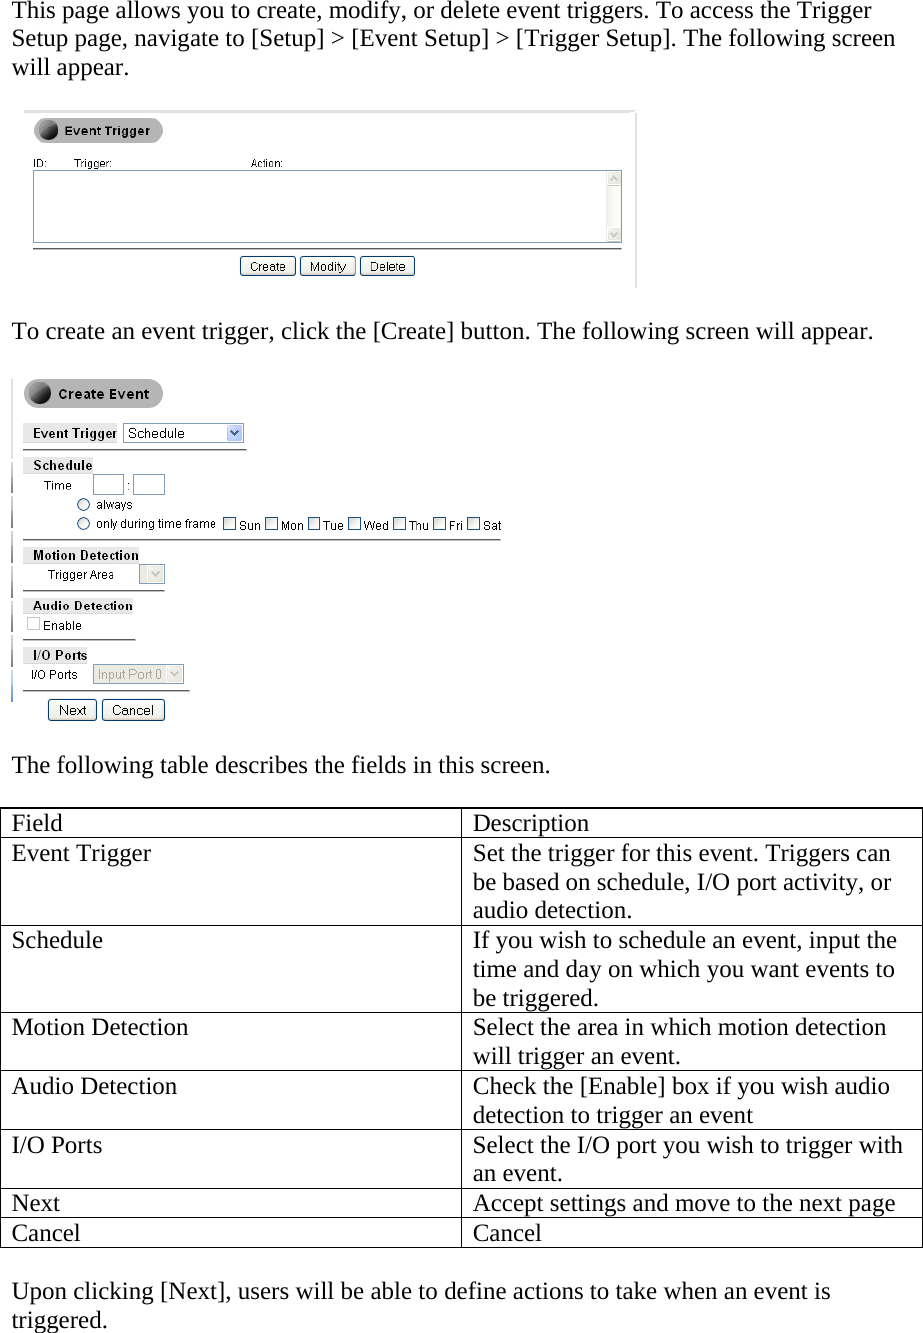 This page allows you to create, modify, or delete event triggers. To access the Trigger Setup page, navigate to [Setup] &gt; [Event Setup] &gt; [Trigger Setup]. The following screen will appear.        To create an event trigger, click the [Create] button. The following screen will appear.     The following table describes the fields in this screen.   Field Description Event Trigger  Set the trigger for this event. Triggers can be based on schedule, I/O port activity, or audio detection.  Schedule  If you wish to schedule an event, input the time and day on which you want events to be triggered.  Motion Detection  Select the area in which motion detection will trigger an event.  Audio Detection  Check the [Enable] box if you wish audio detection to trigger an event I/O Ports  Select the I/O port you wish to trigger with an event.  Next  Accept settings and move to the next page Cancel Cancel  Upon clicking [Next], users will be able to define actions to take when an event is triggered.  